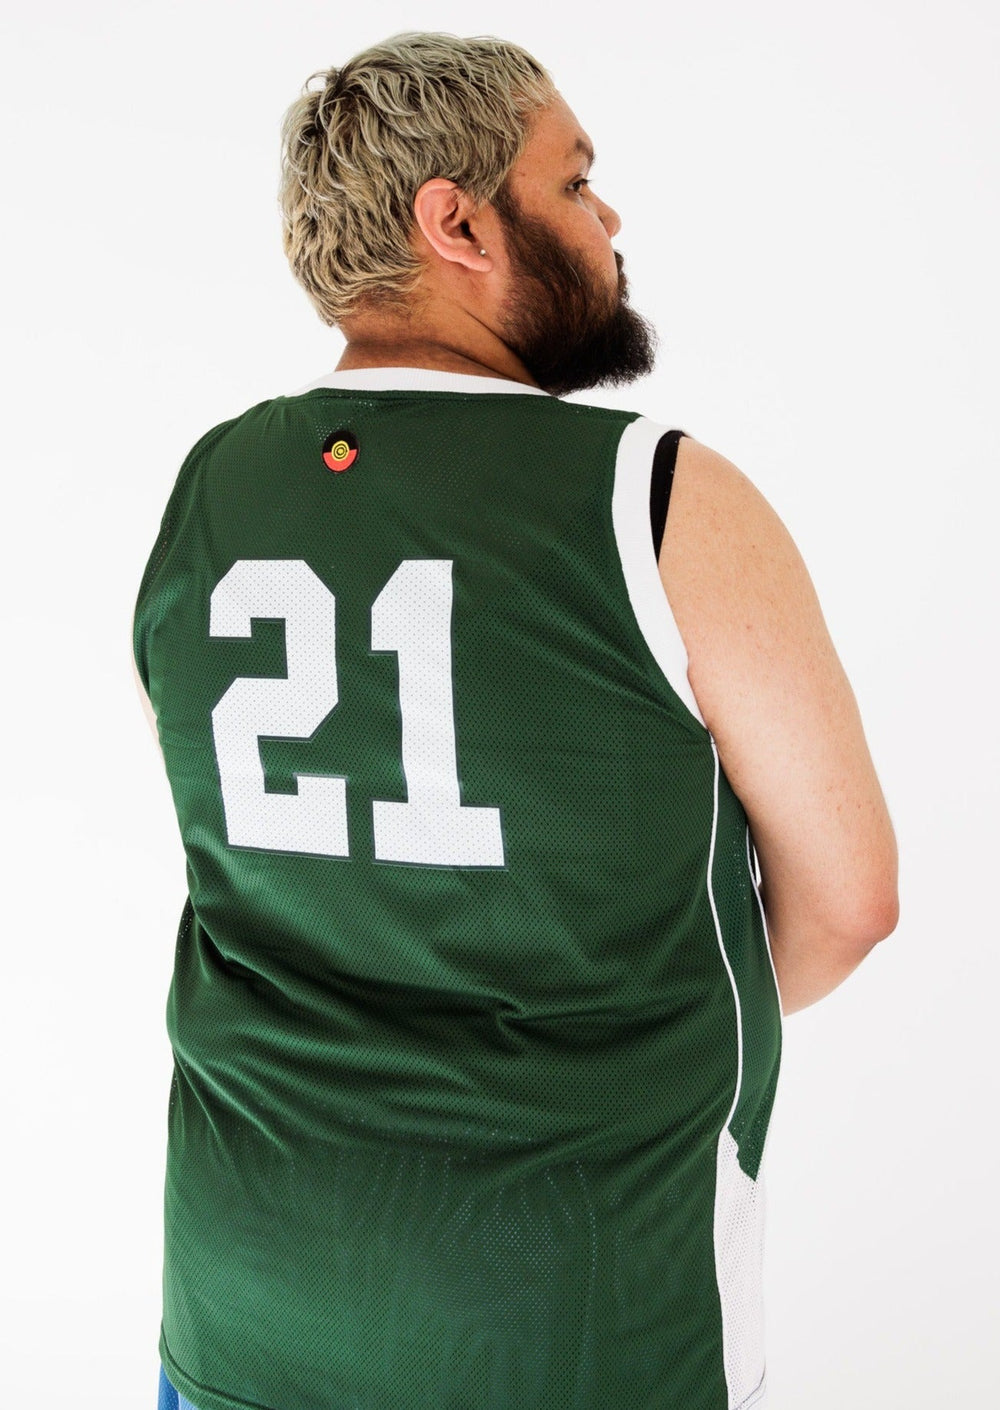 Clothing The Gaps. Heal Country Basketball Jersey. Dark green back ground with outlined Bunjil the Eagle, the creator spirit and 'Heal Country' text in white on centre of jersey. '21' in bold white numbers on left corner of front. On back of jersey '21' in big white letters in centre. Giving us Boston Celtics energy with white knitted bands around arms and neck.